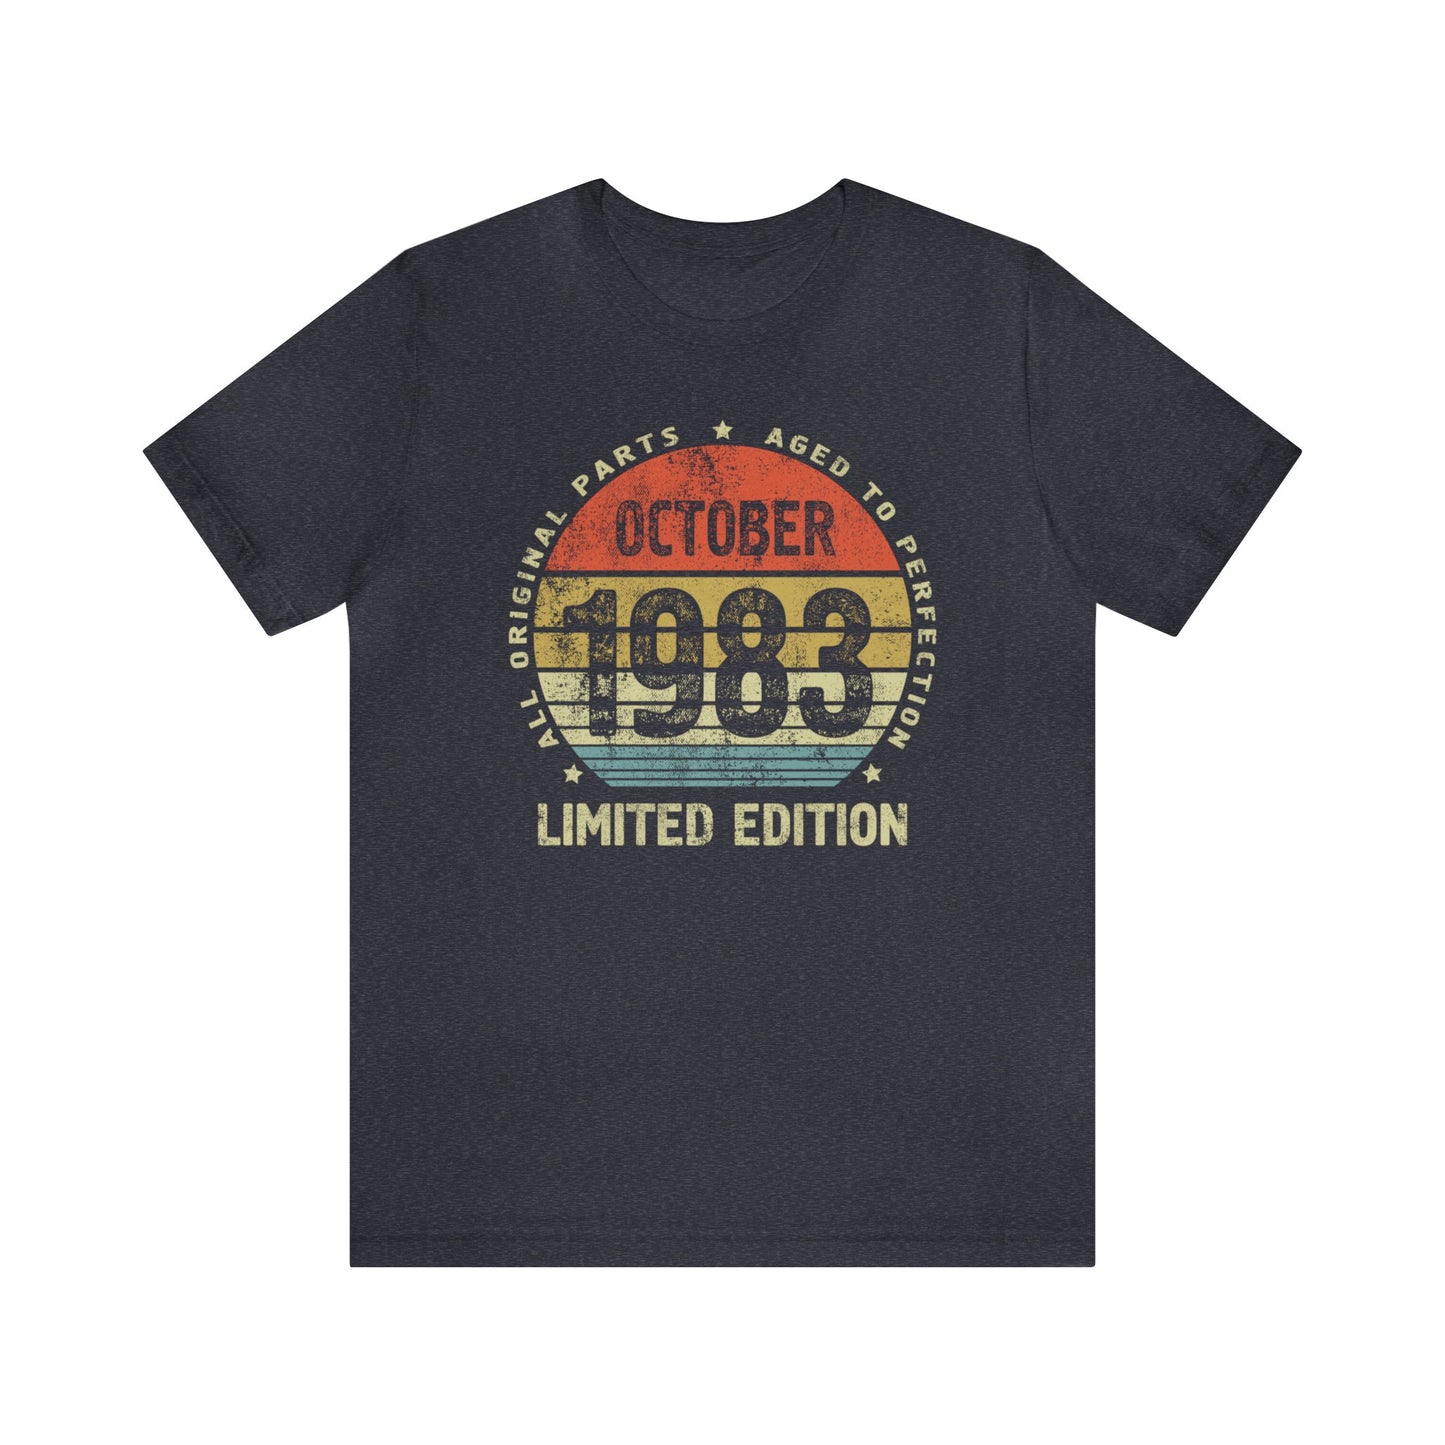 40th birthday gift shirt for men or women October 1983 t-shirt for wife or husband